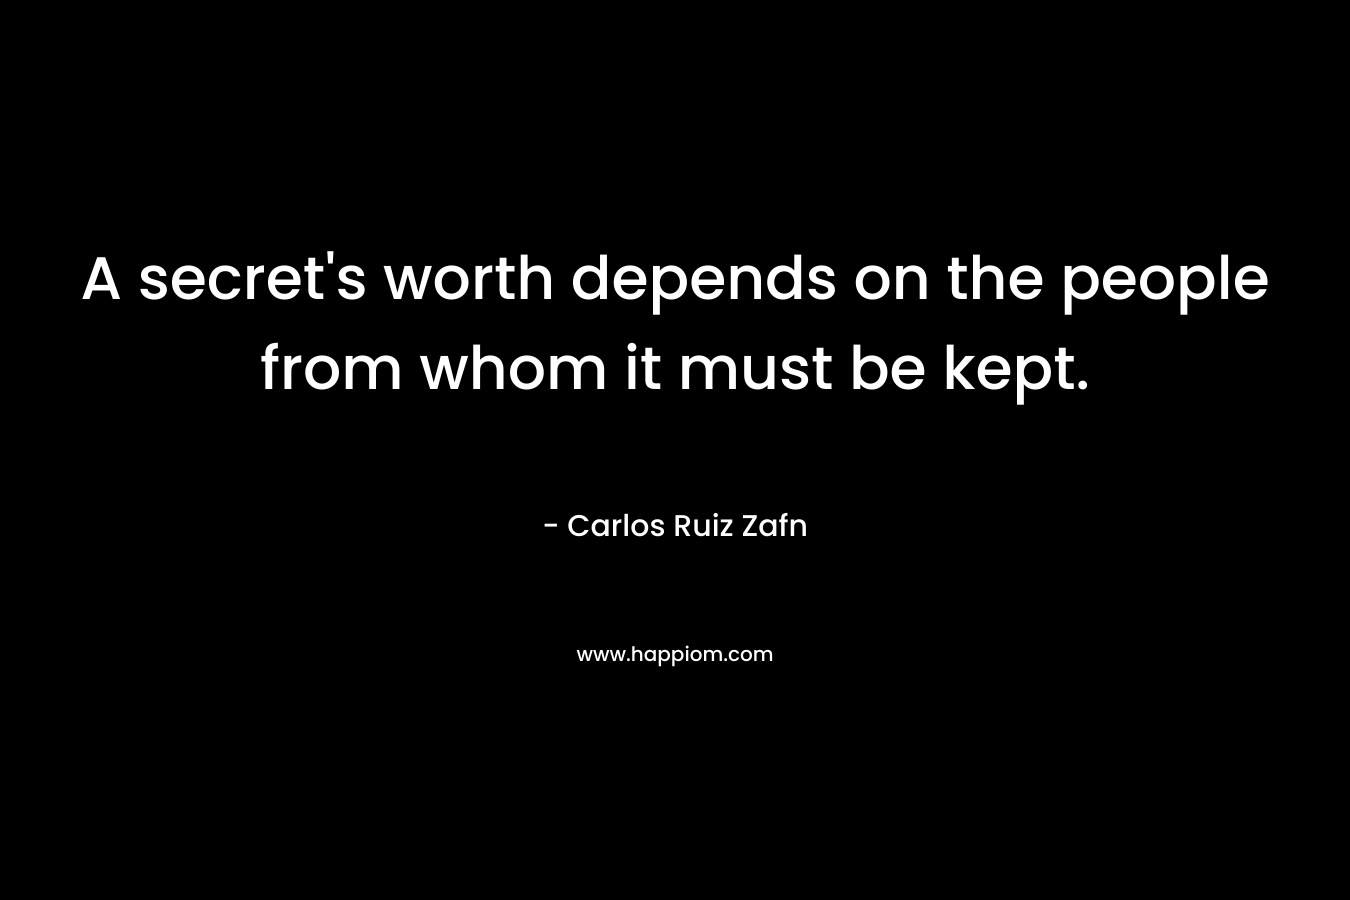 A secret’s worth depends on the people from whom it must be kept. – Carlos Ruiz Zafn